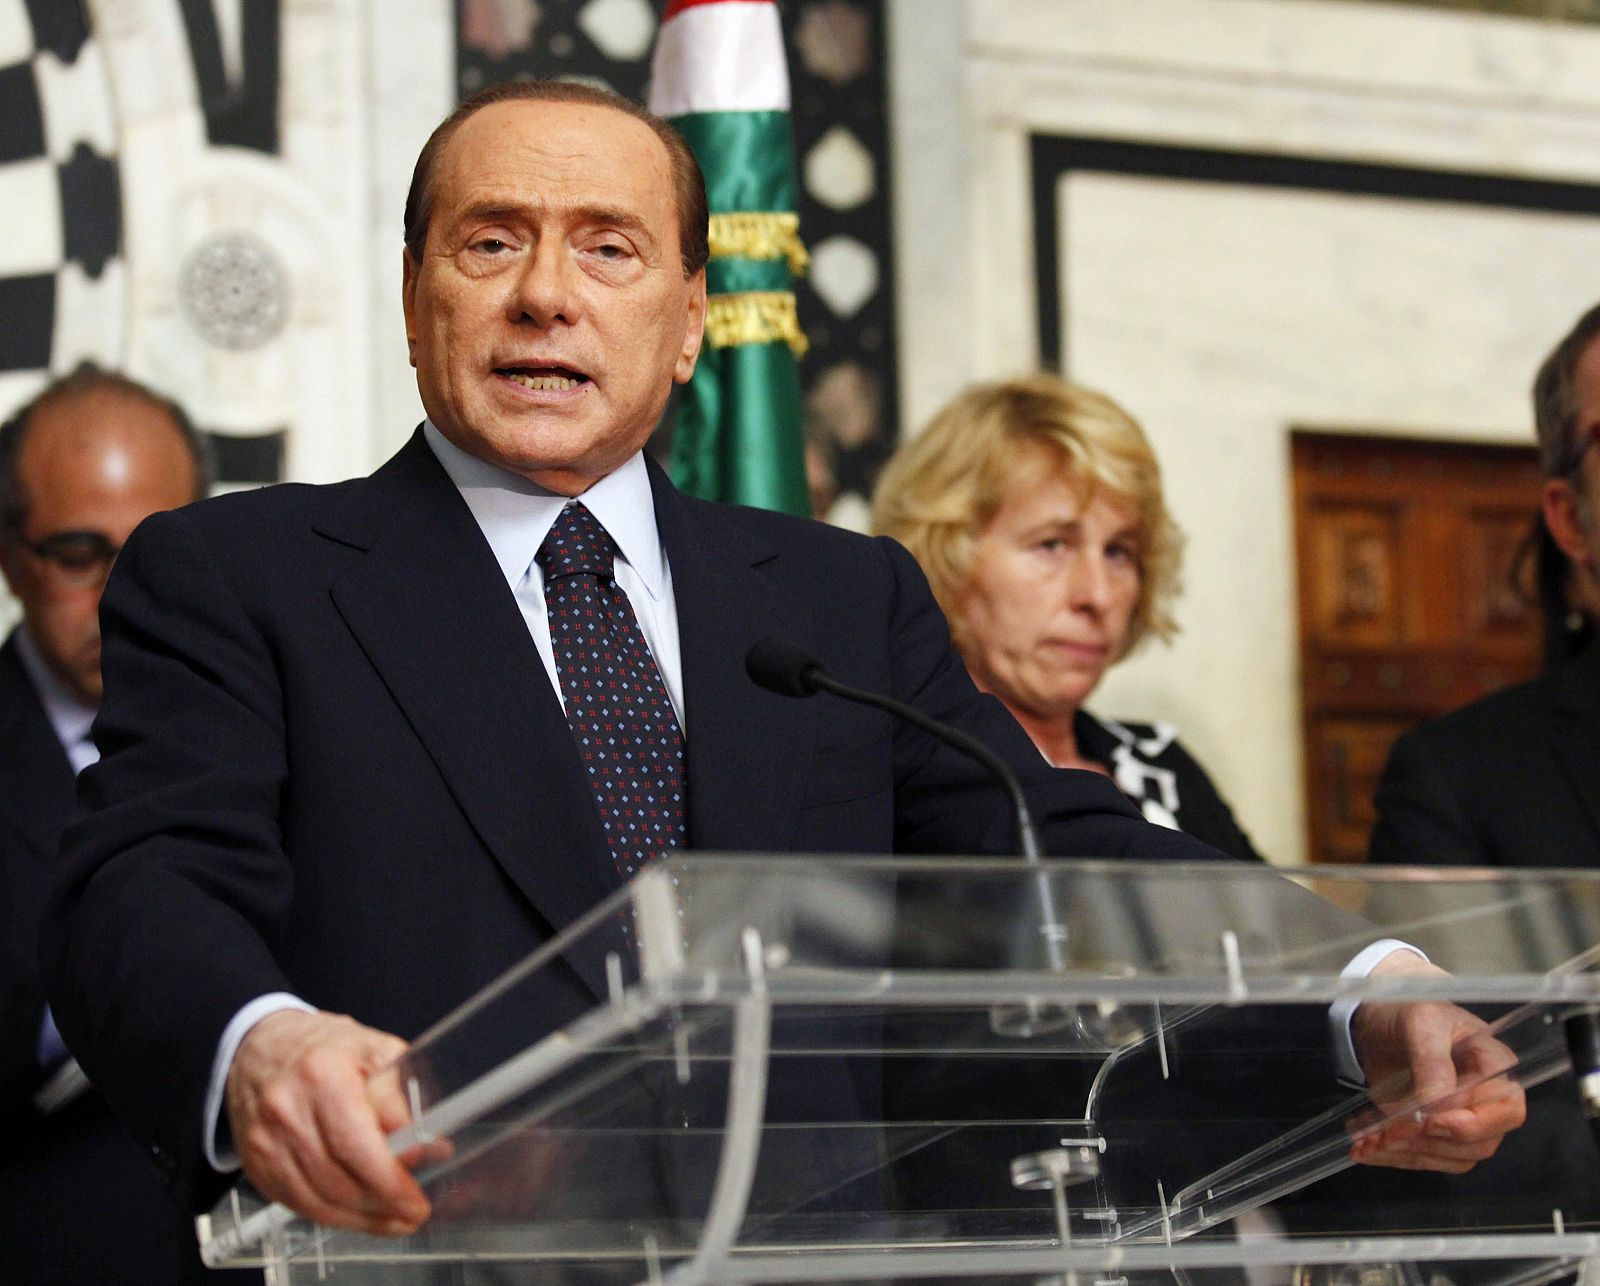 Italian Prime Minister Silvio Berlusconi speaks during a news conference in Tunis